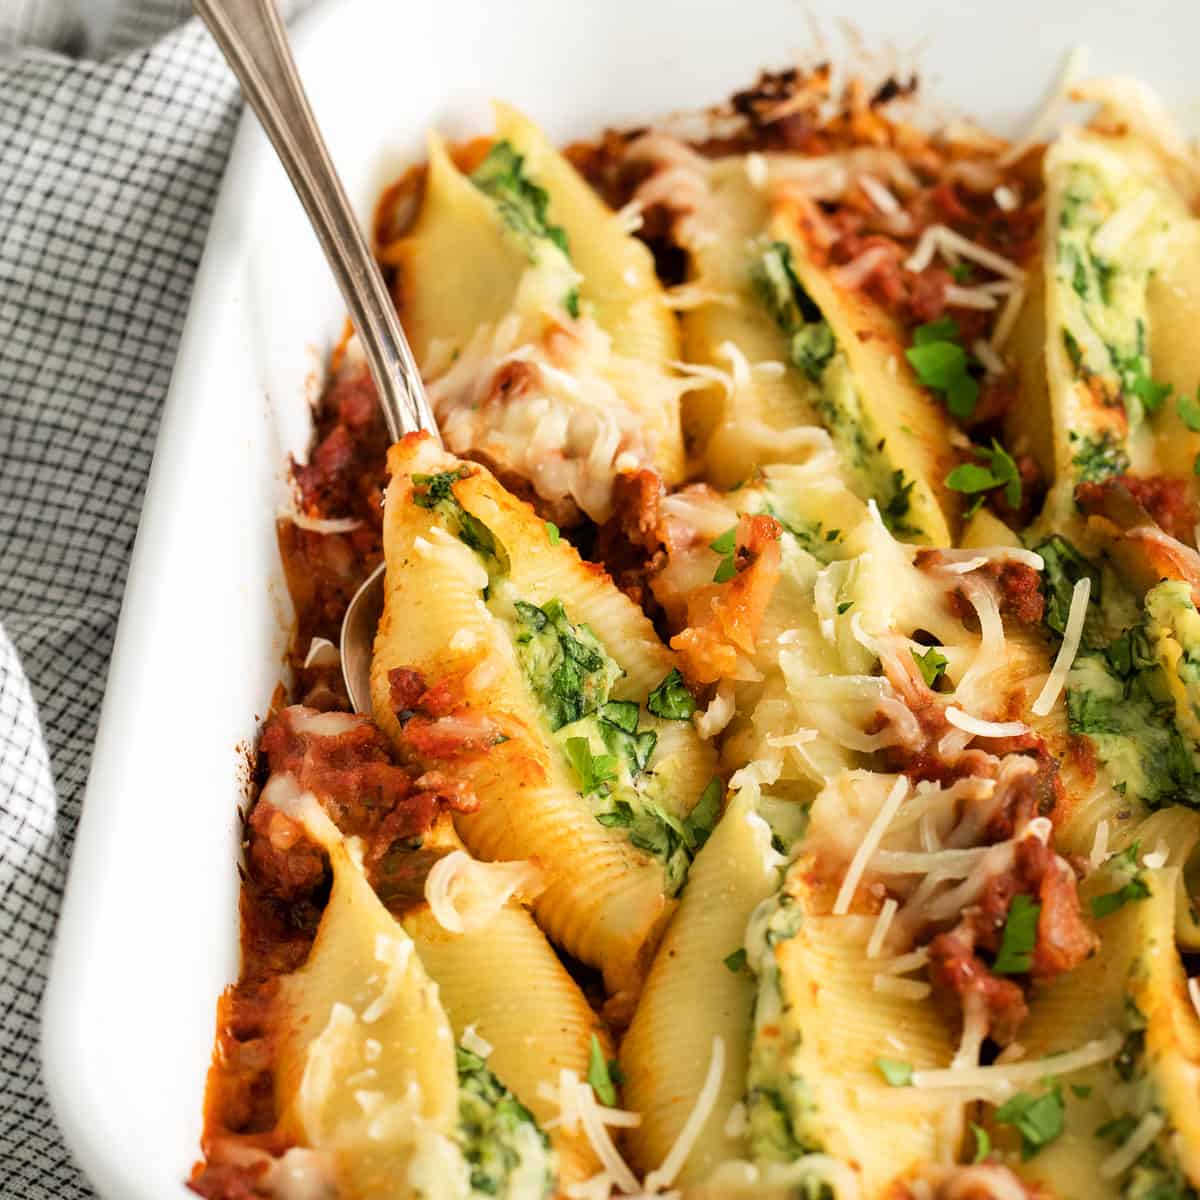 Stuffed Shells with Meat Sauce - The Cheese Knees